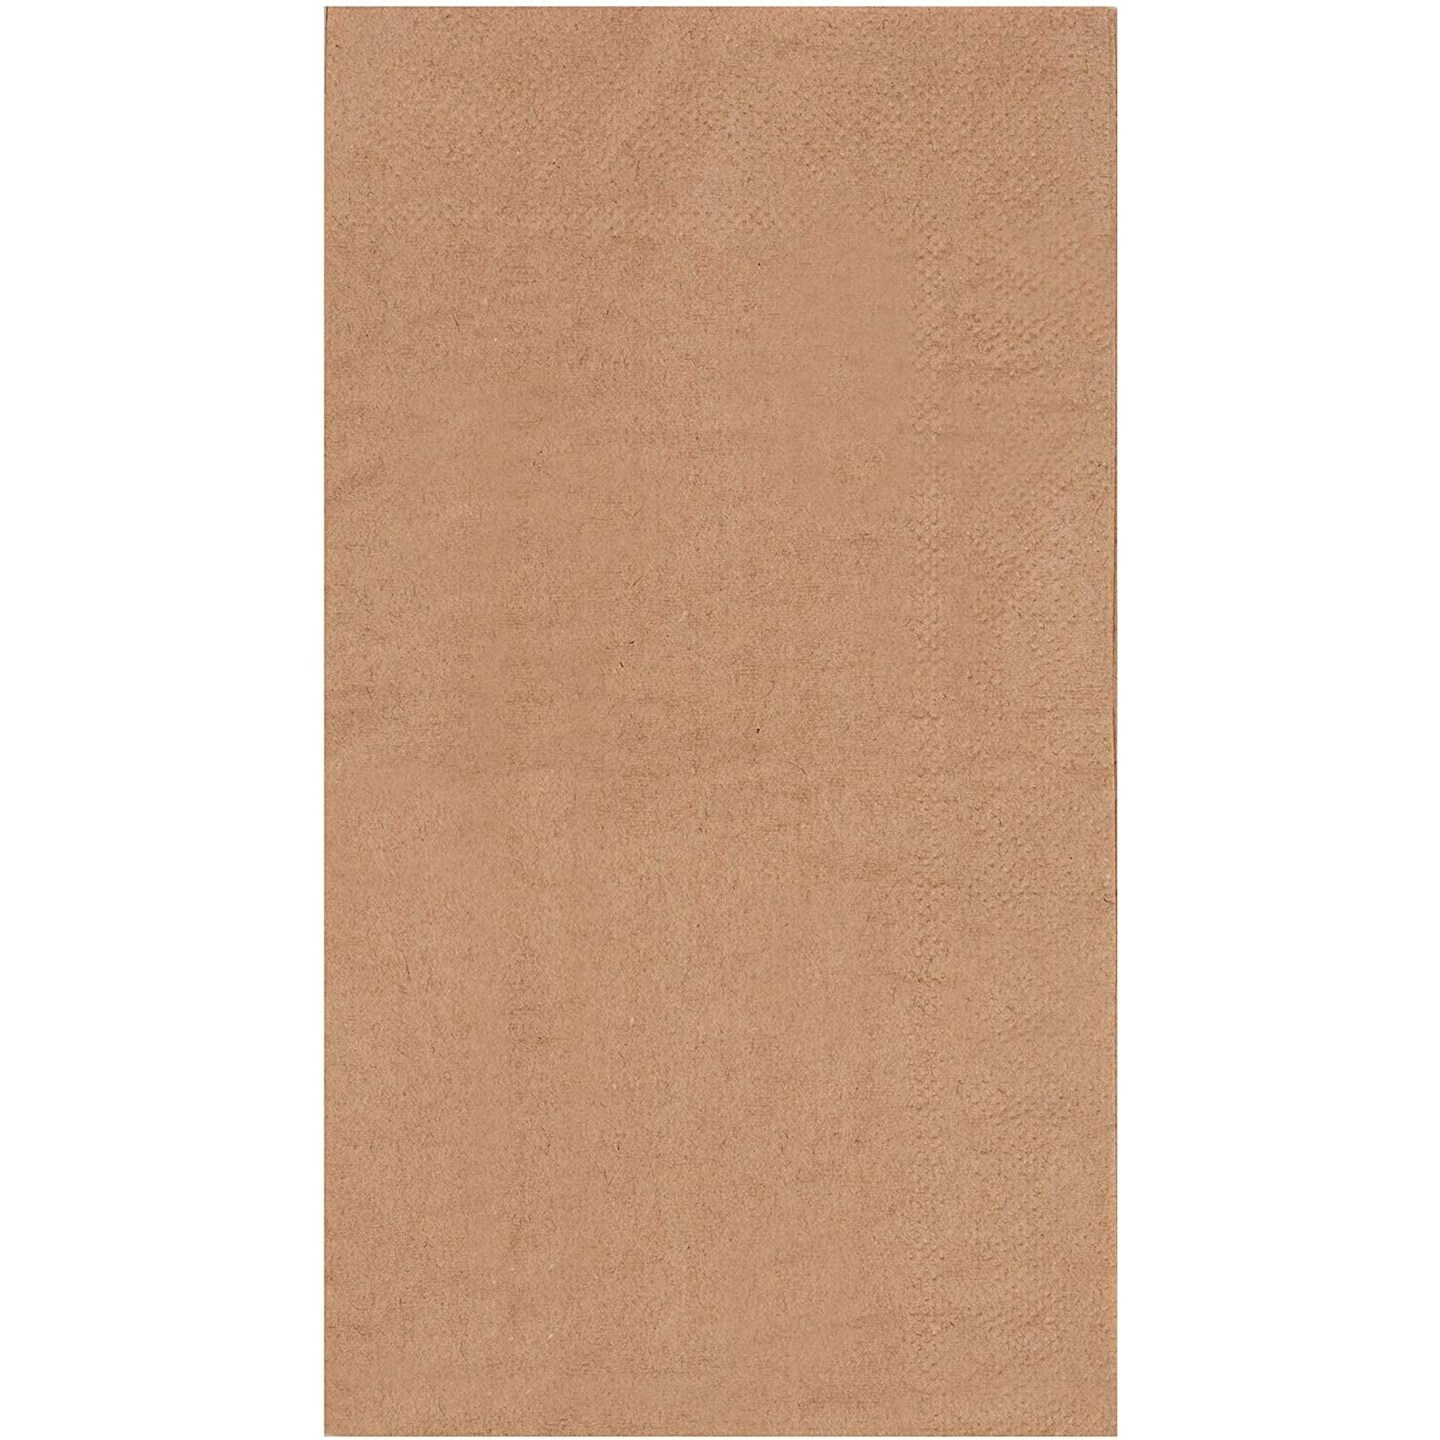 Kraft Party Supplies, Paper Napkins (Brown, 7.8 x 4.4 In, 200 Pack)